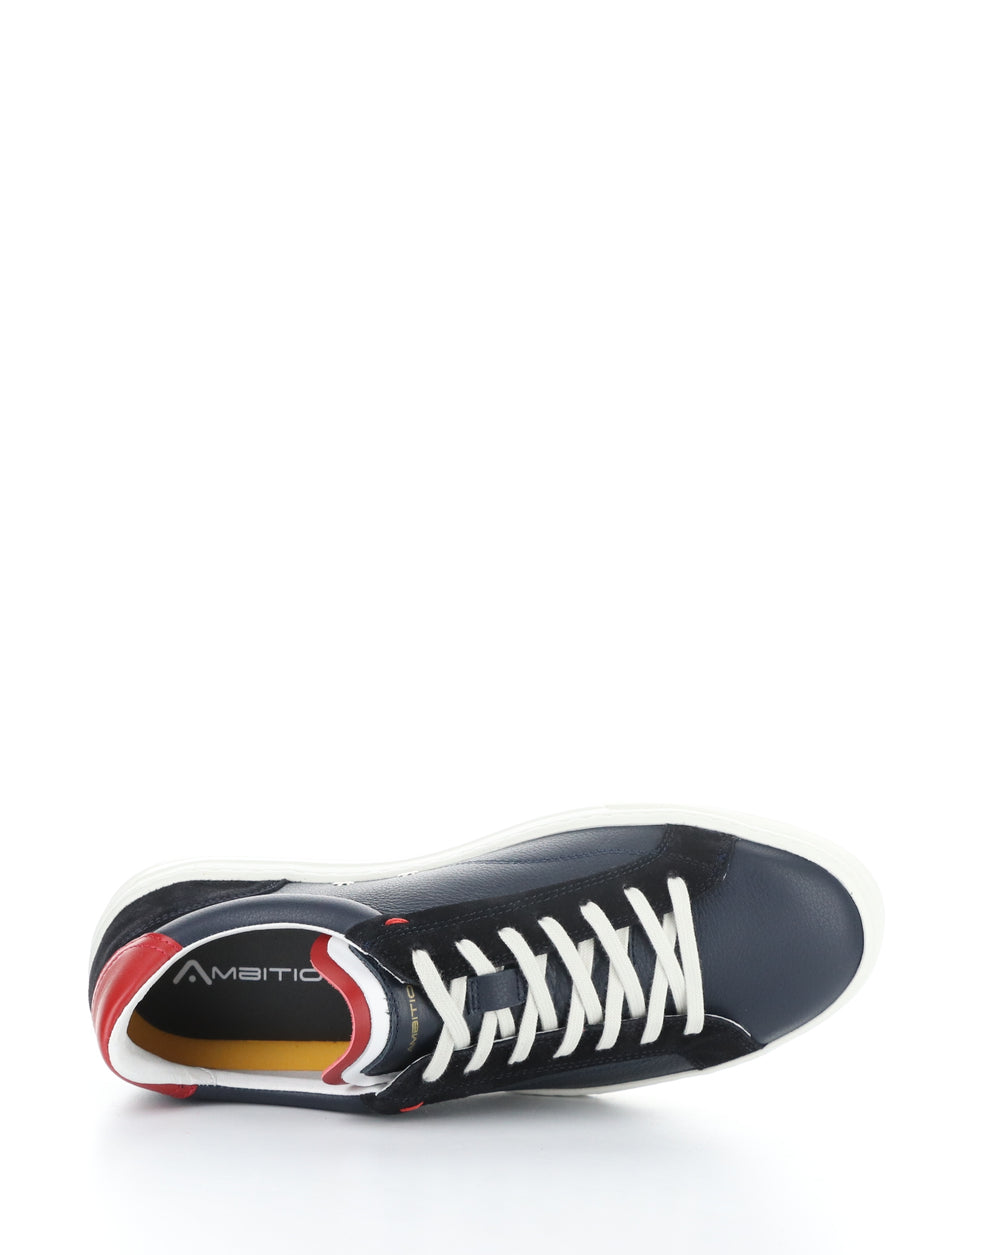 11218 NAVY/WHITE/RED Lace-up Shoes